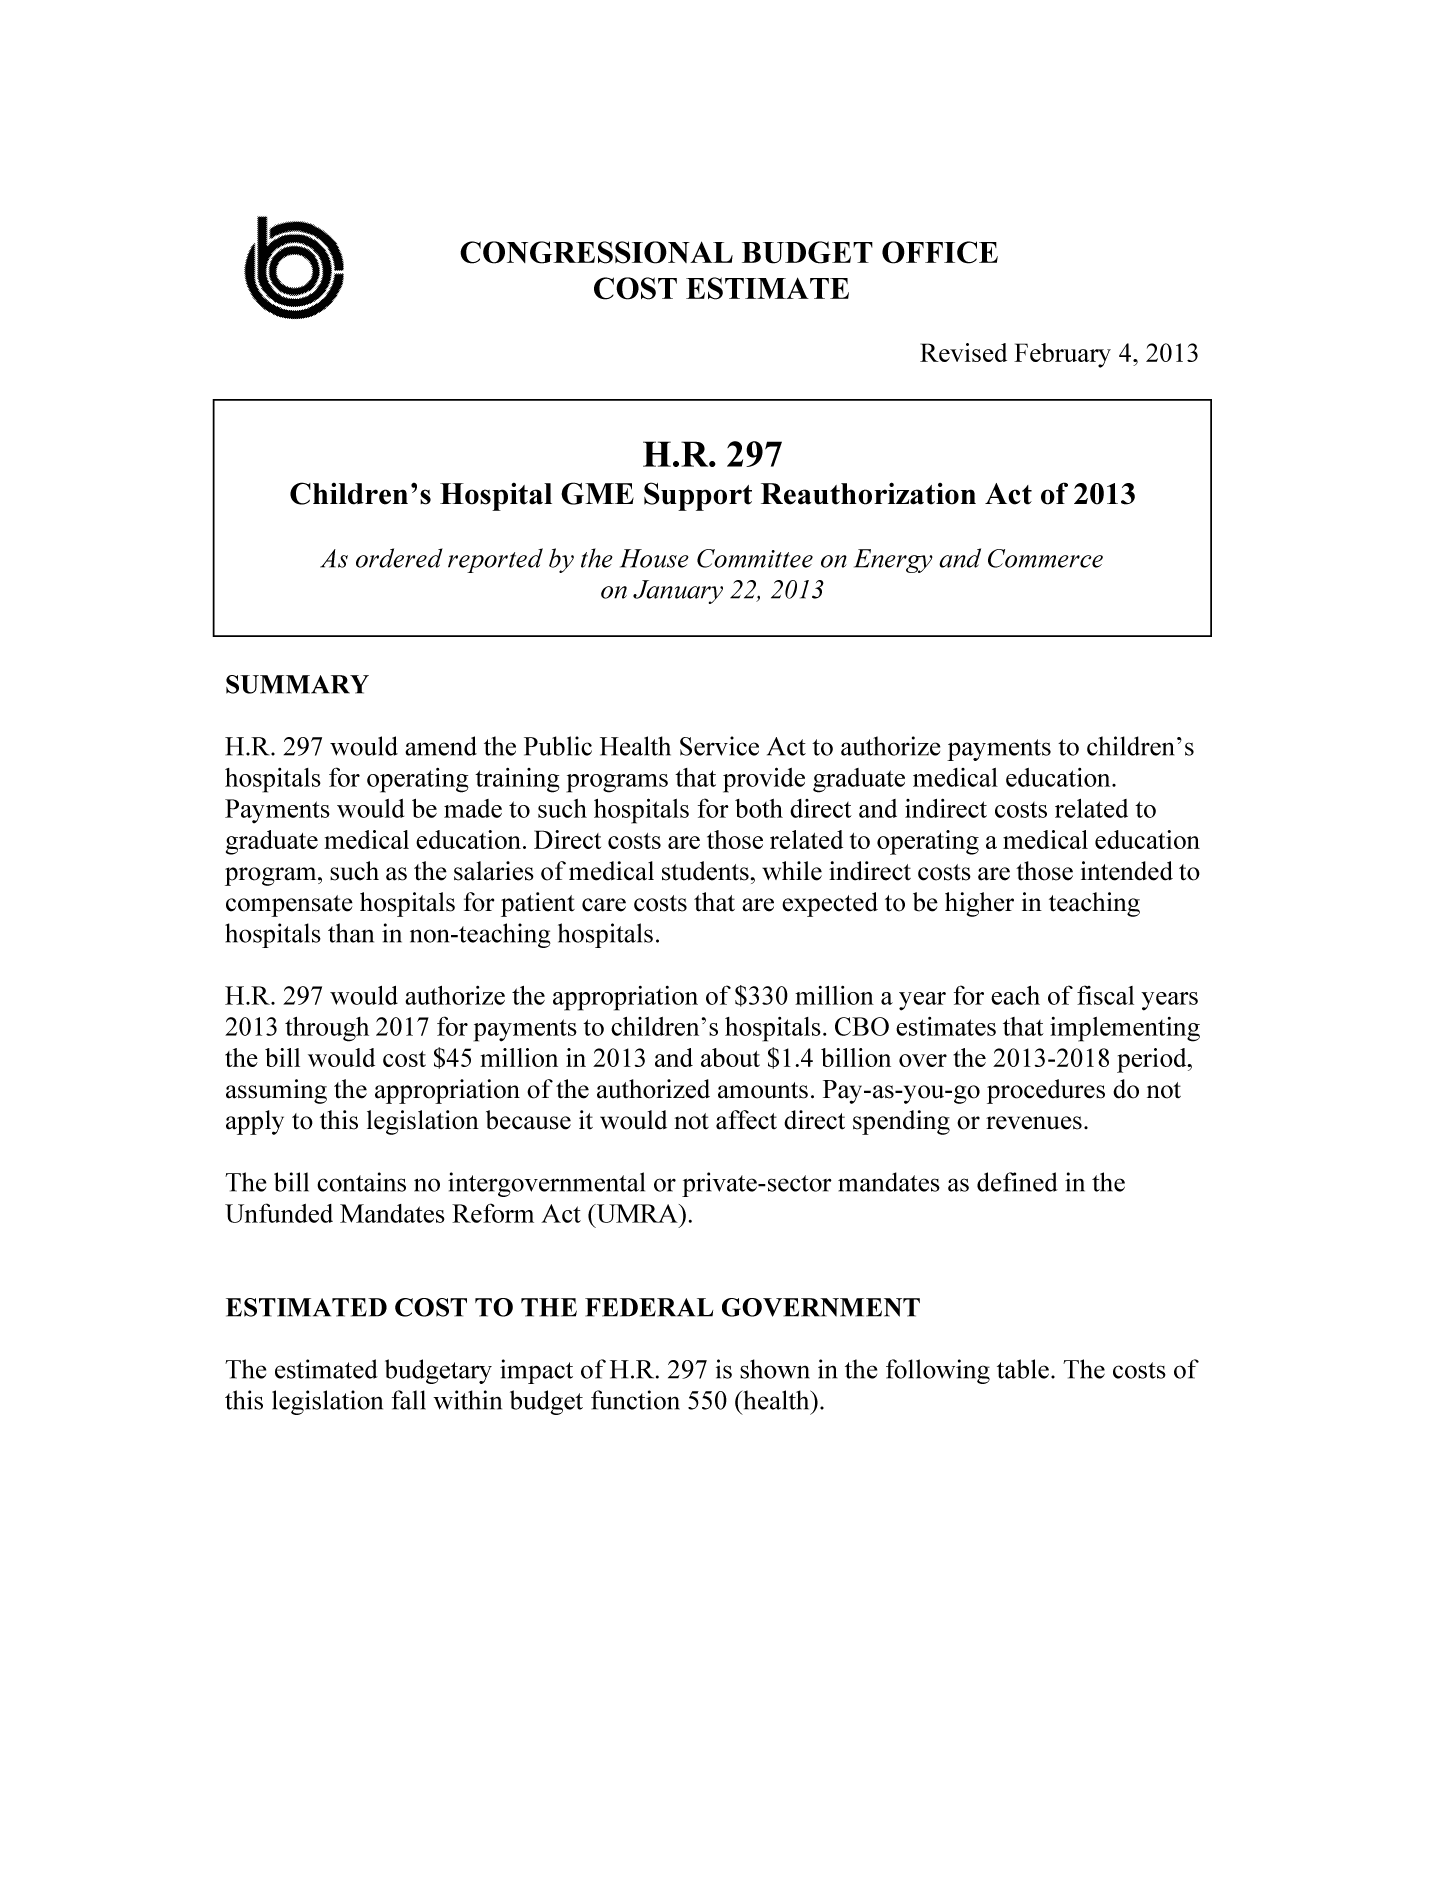 handle is hein.congrec/cbo10977 and id is 1 raw text is: CONGRESSIONAL BUDGET OFFICE
UCOST ESTIMATE
Revised February 4, 2013
H.R. 297
Children's Hospital GME Support Reauthorization Act of 2013
As ordered reported by the House Committee on Energy and Commerce
on January 22, 2013
SUMMARY
H.R. 297 would amend the Public Health Service Act to authorize payments to children's
hospitals for operating training programs that provide graduate medical education.
Payments would be made to such hospitals for both direct and indirect costs related to
graduate medical education. Direct costs are those related to operating a medical education
program, such as the salaries of medical students, while indirect costs are those intended to
compensate hospitals for patient care costs that are expected to be higher in teaching
hospitals than in non-teaching hospitals.
H.R. 297 would authorize the appropriation of $330 million a year for each of fiscal years
2013 through 2017 for payments to children's hospitals. CBO estimates that implementing
the bill would cost $45 million in 2013 and about $1.4 billion over the 2013-2018 period,
assuming the appropriation of the authorized amounts. Pay-as-you-go procedures do not
apply to this legislation because it would not affect direct spending or revenues.
The bill contains no intergovernmental or private-sector mandates as defined in the
Unfunded Mandates Reform Act (UMRA).
ESTIMATED COST TO THE FEDERAL GOVERNMENT
The estimated budgetary impact of H.R. 297 is shown in the following table. The costs of
this legislation fall within budget function 550 (health).


